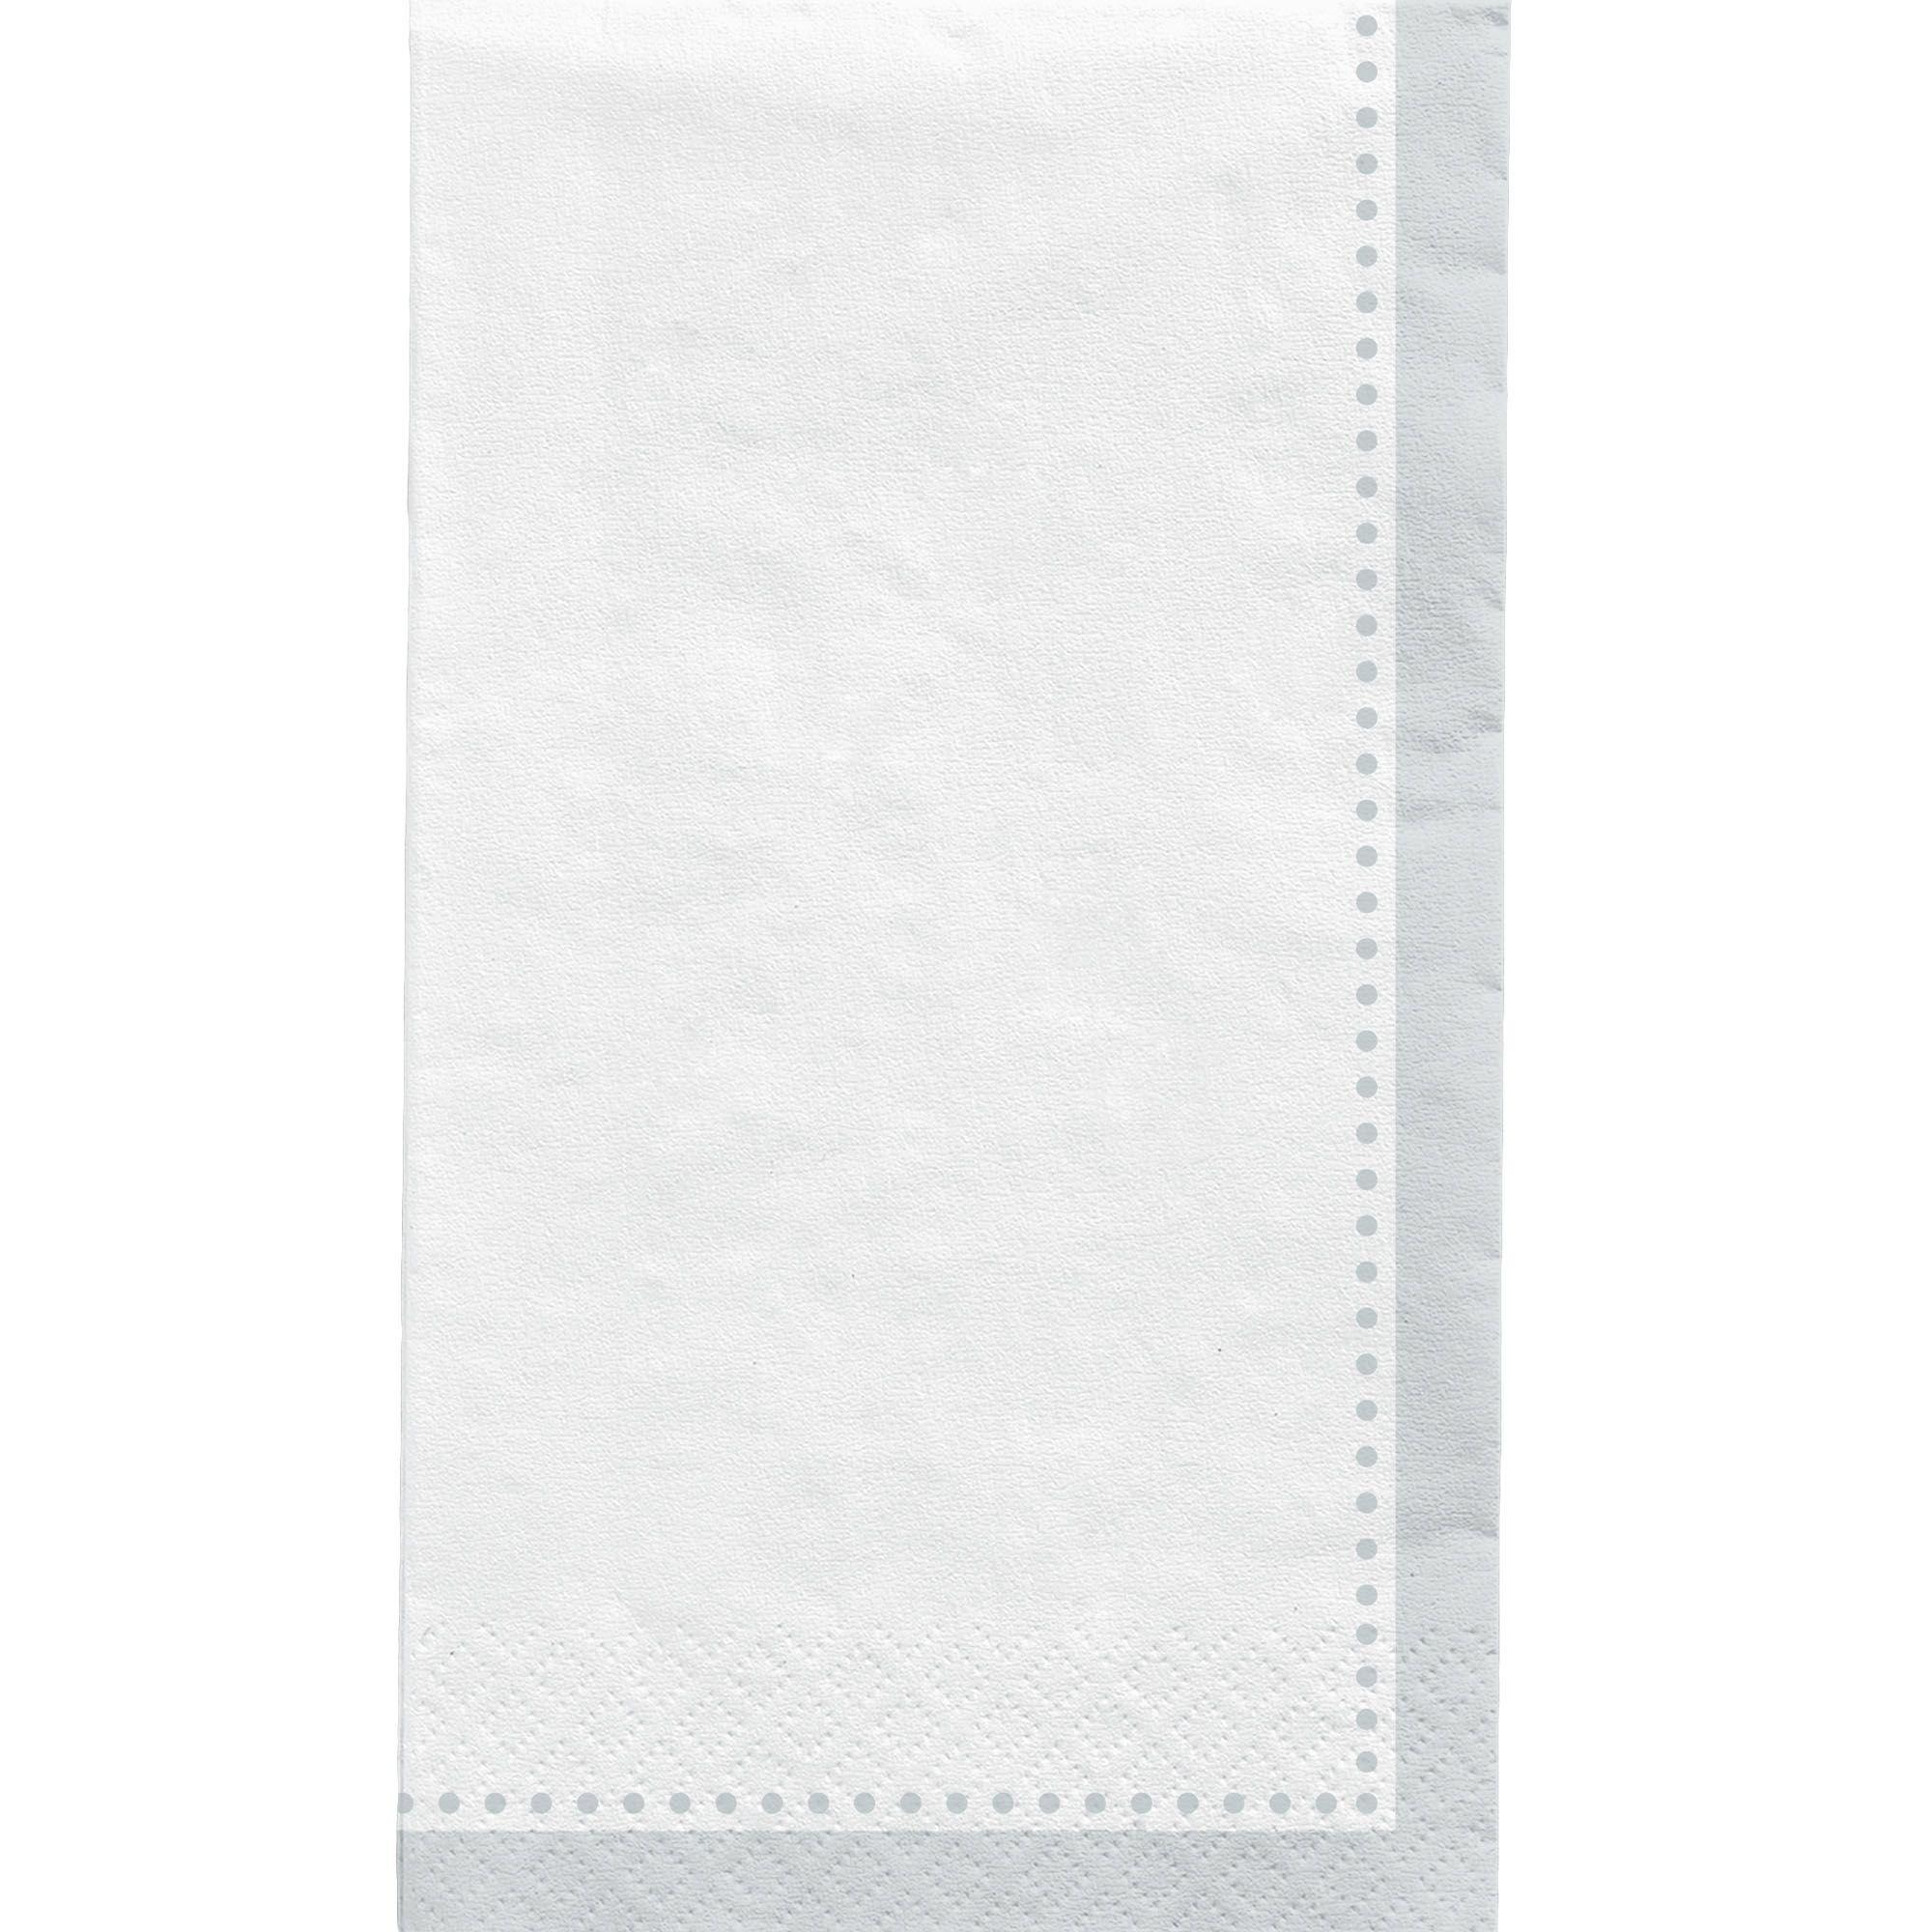 Silver Premium Paper Buffet Napkins, 4.5in x 7.75in, 20ct | Party City